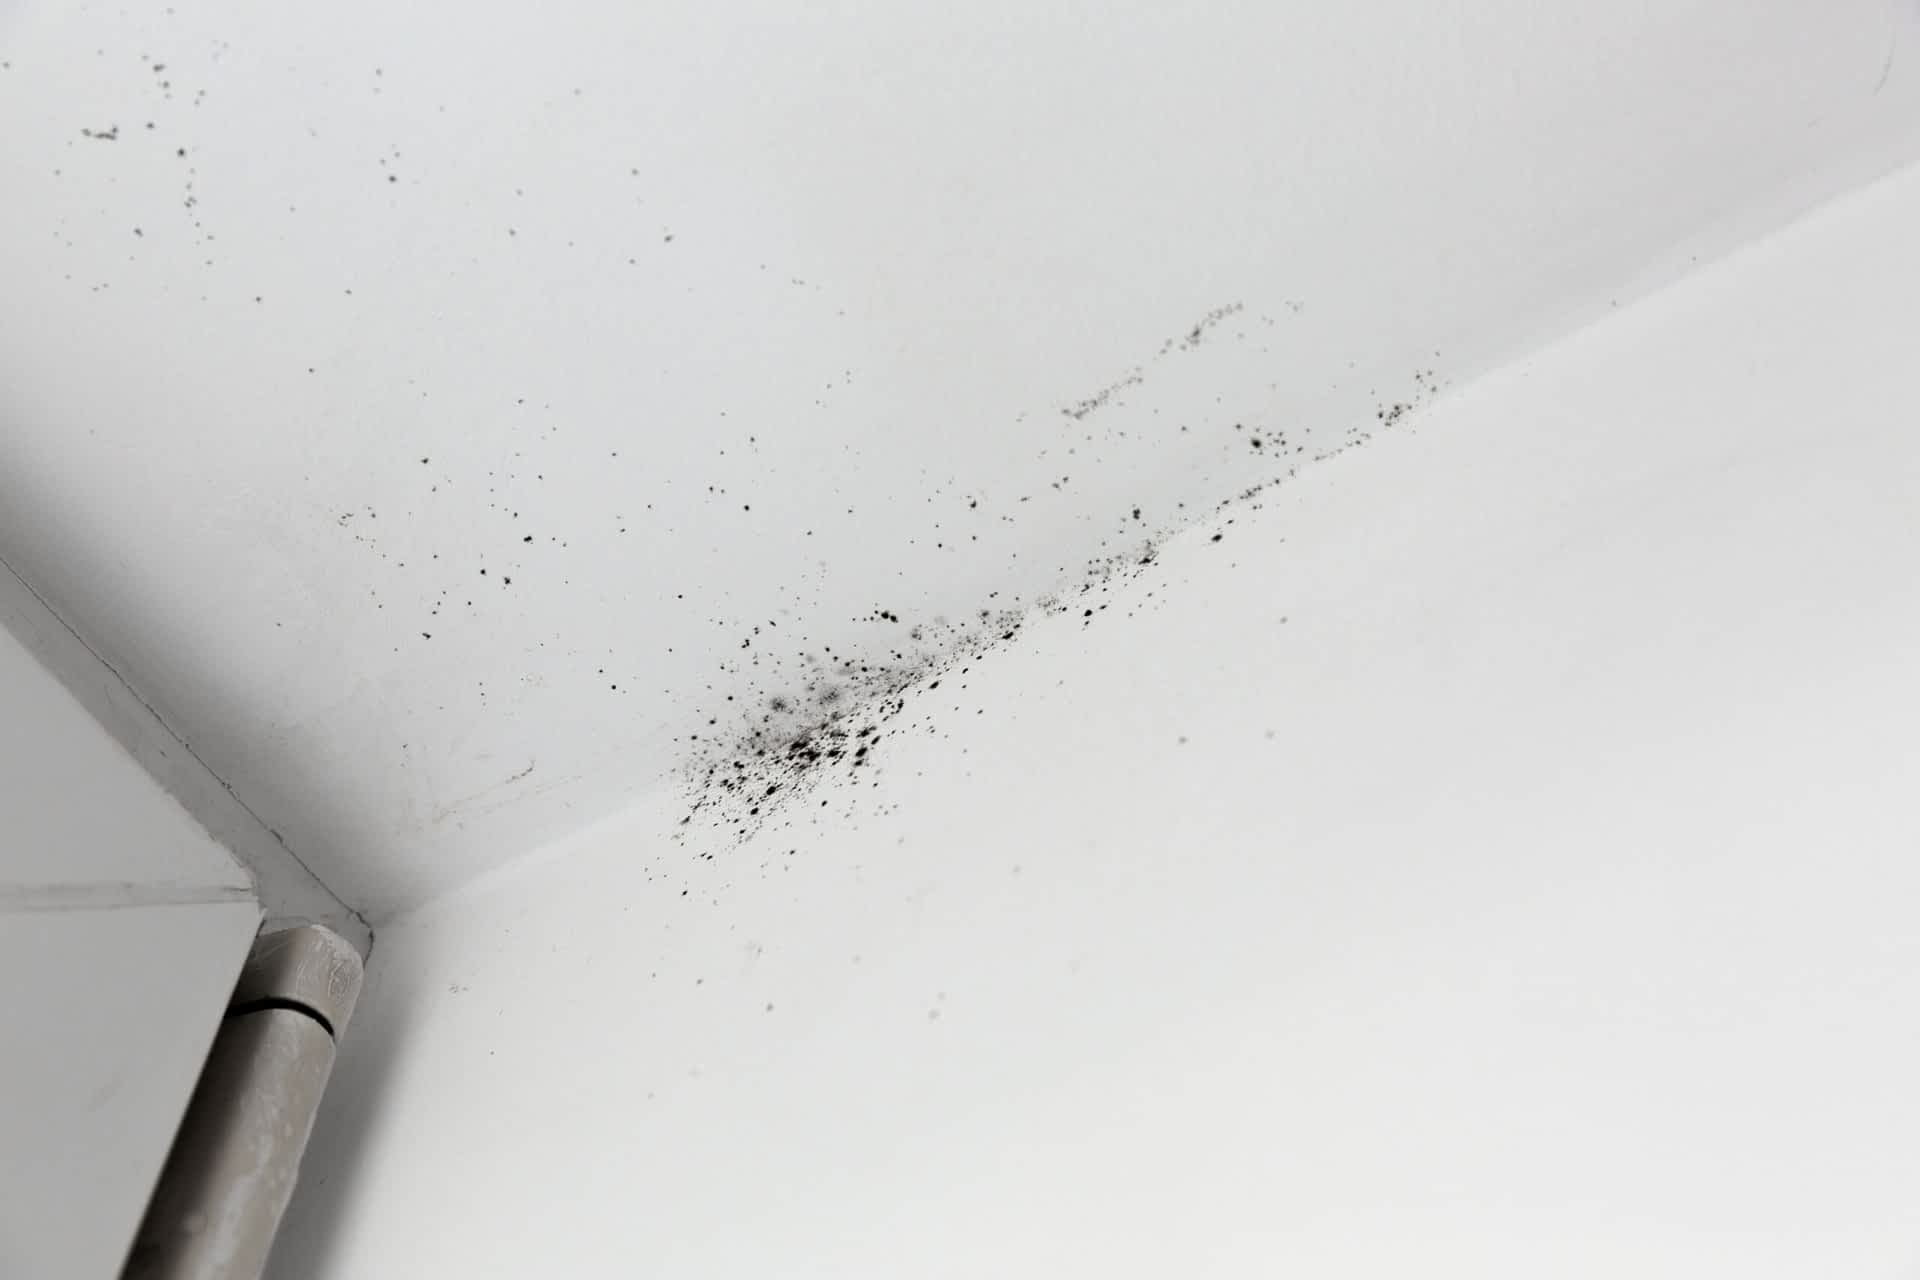 Mold Inspection and Tests Contractor New York - A Moldy Ceiling Starting to Show Mold